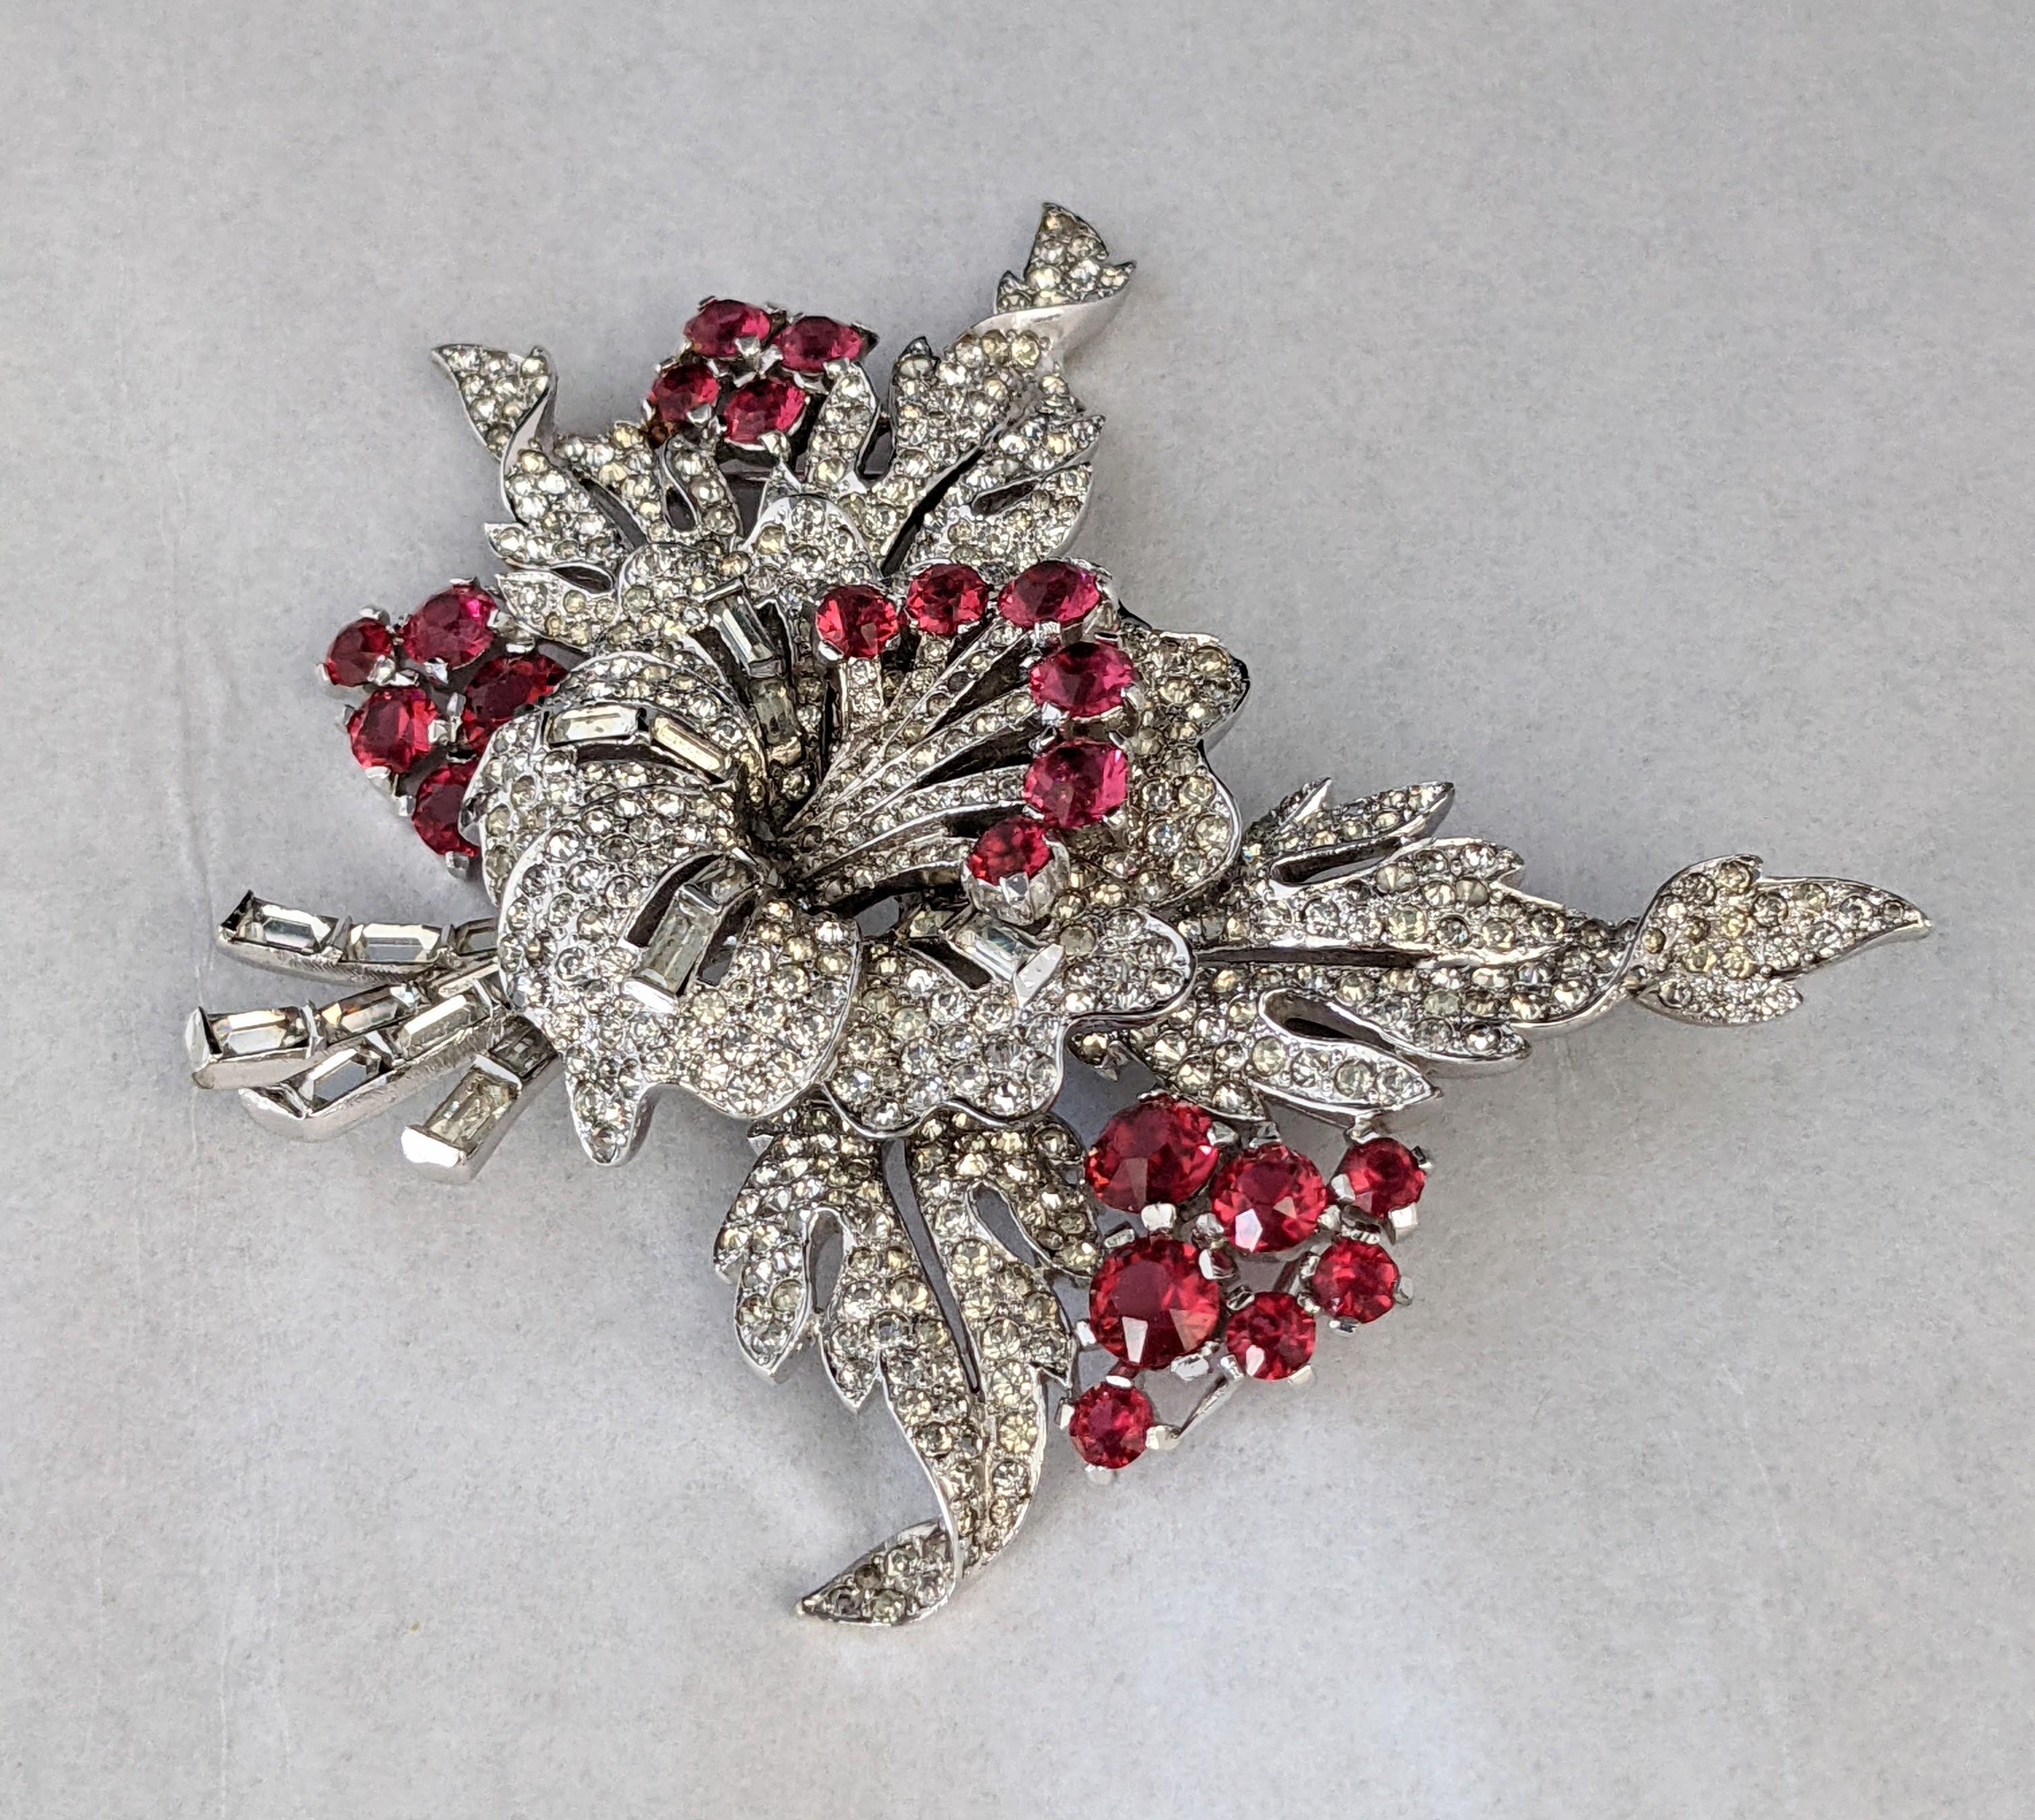 Extraordinary Marcel Boucher Flower Corsage Clip Brooch In Excellent Condition For Sale In New York, NY